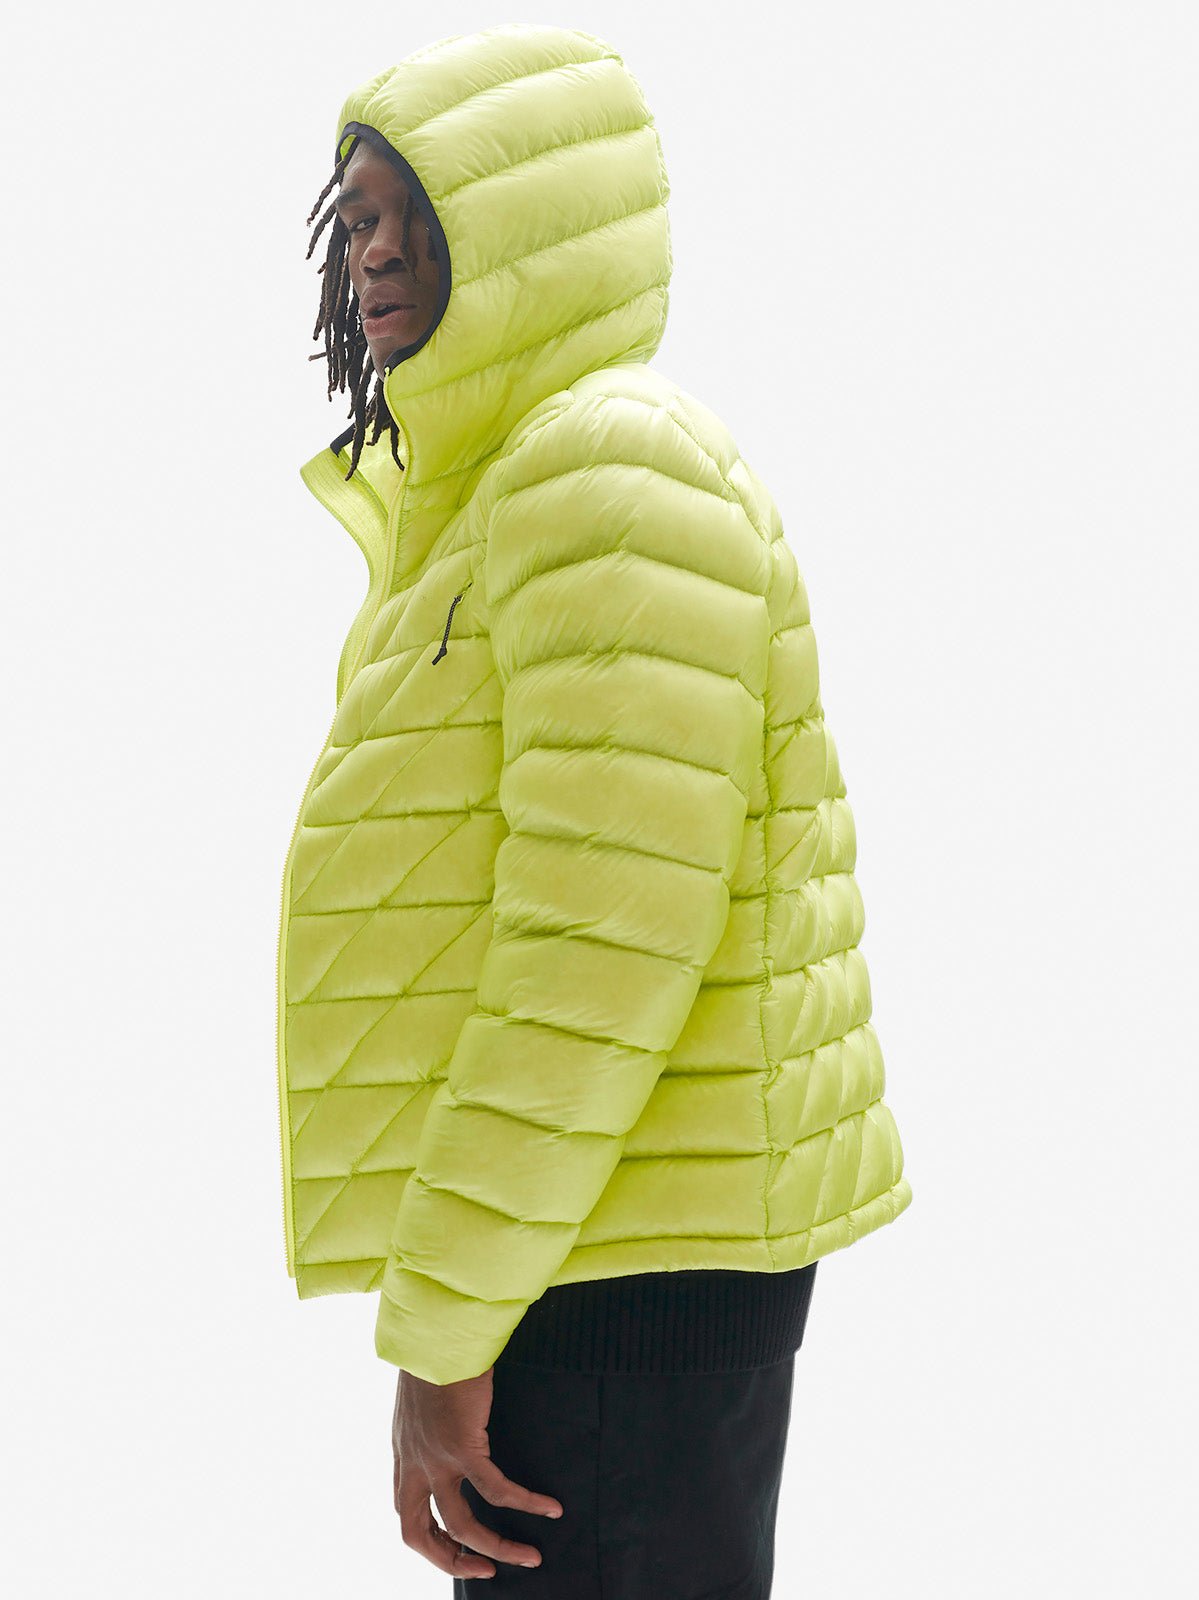 Man PACKABLE DOWN JACKET - Mineral Yellow - side - hood up